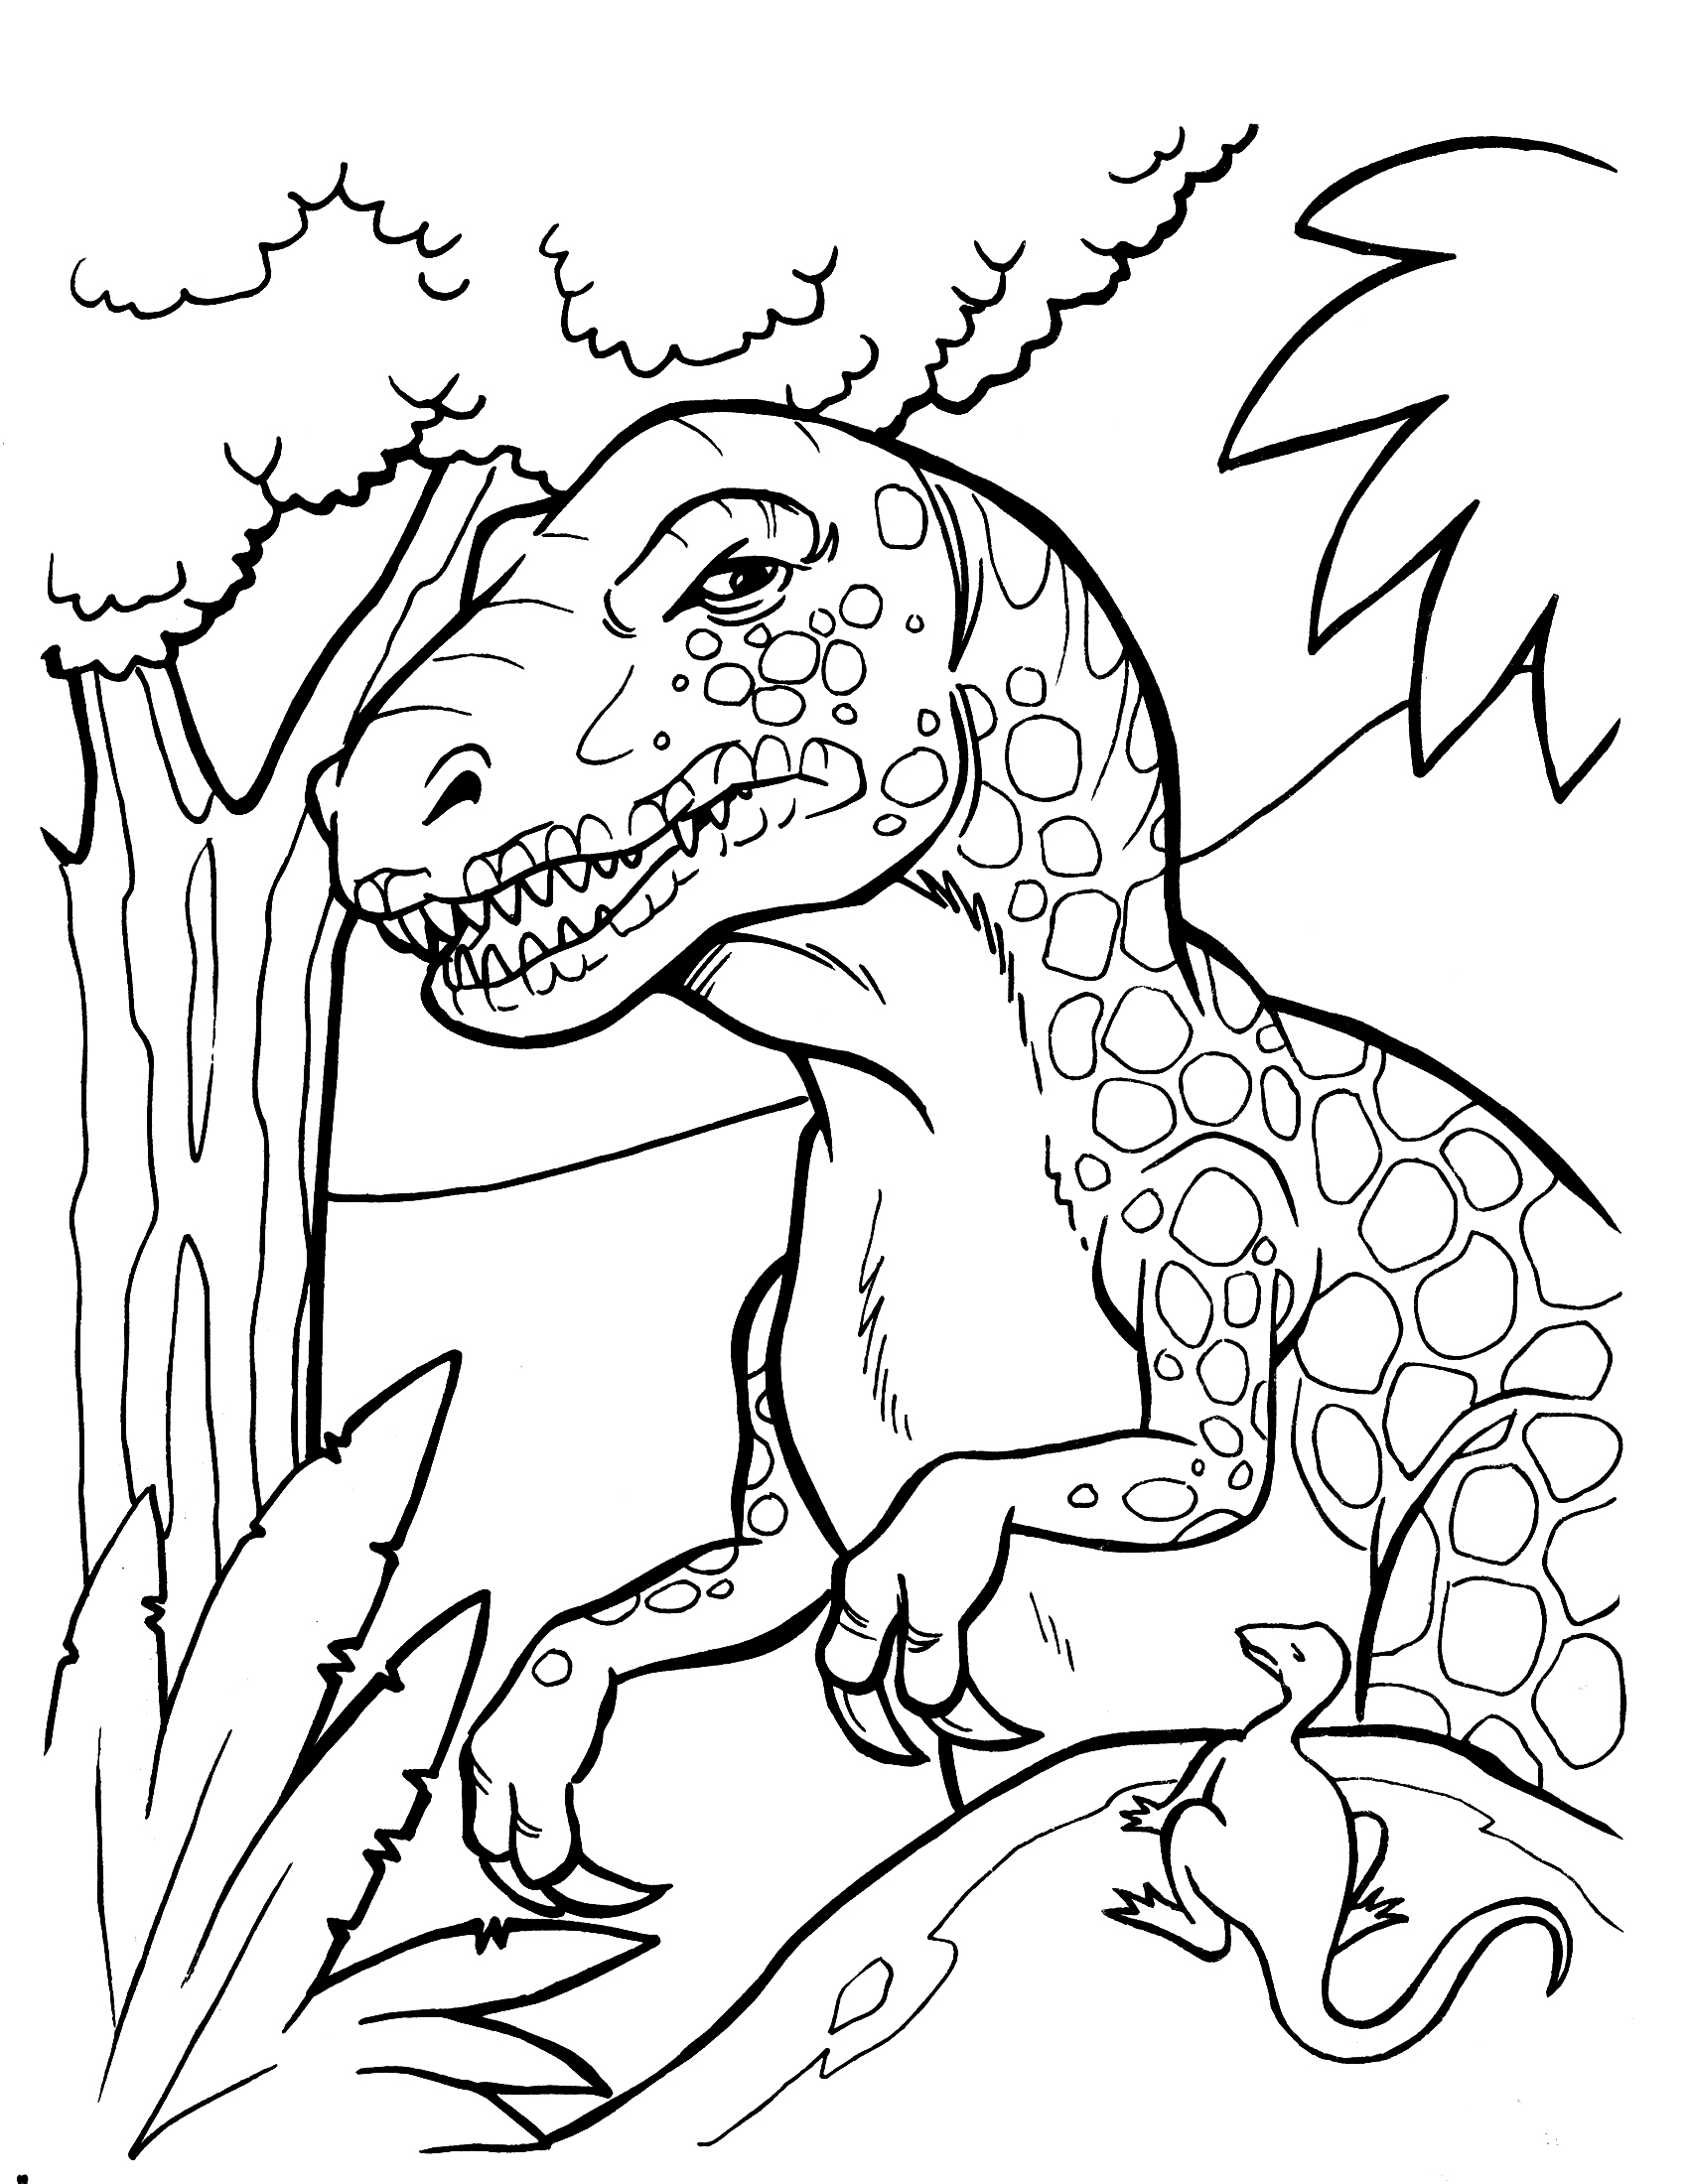 Download Dinosaurs Coloring Pages T Rex at GetColorings.com | Free ...